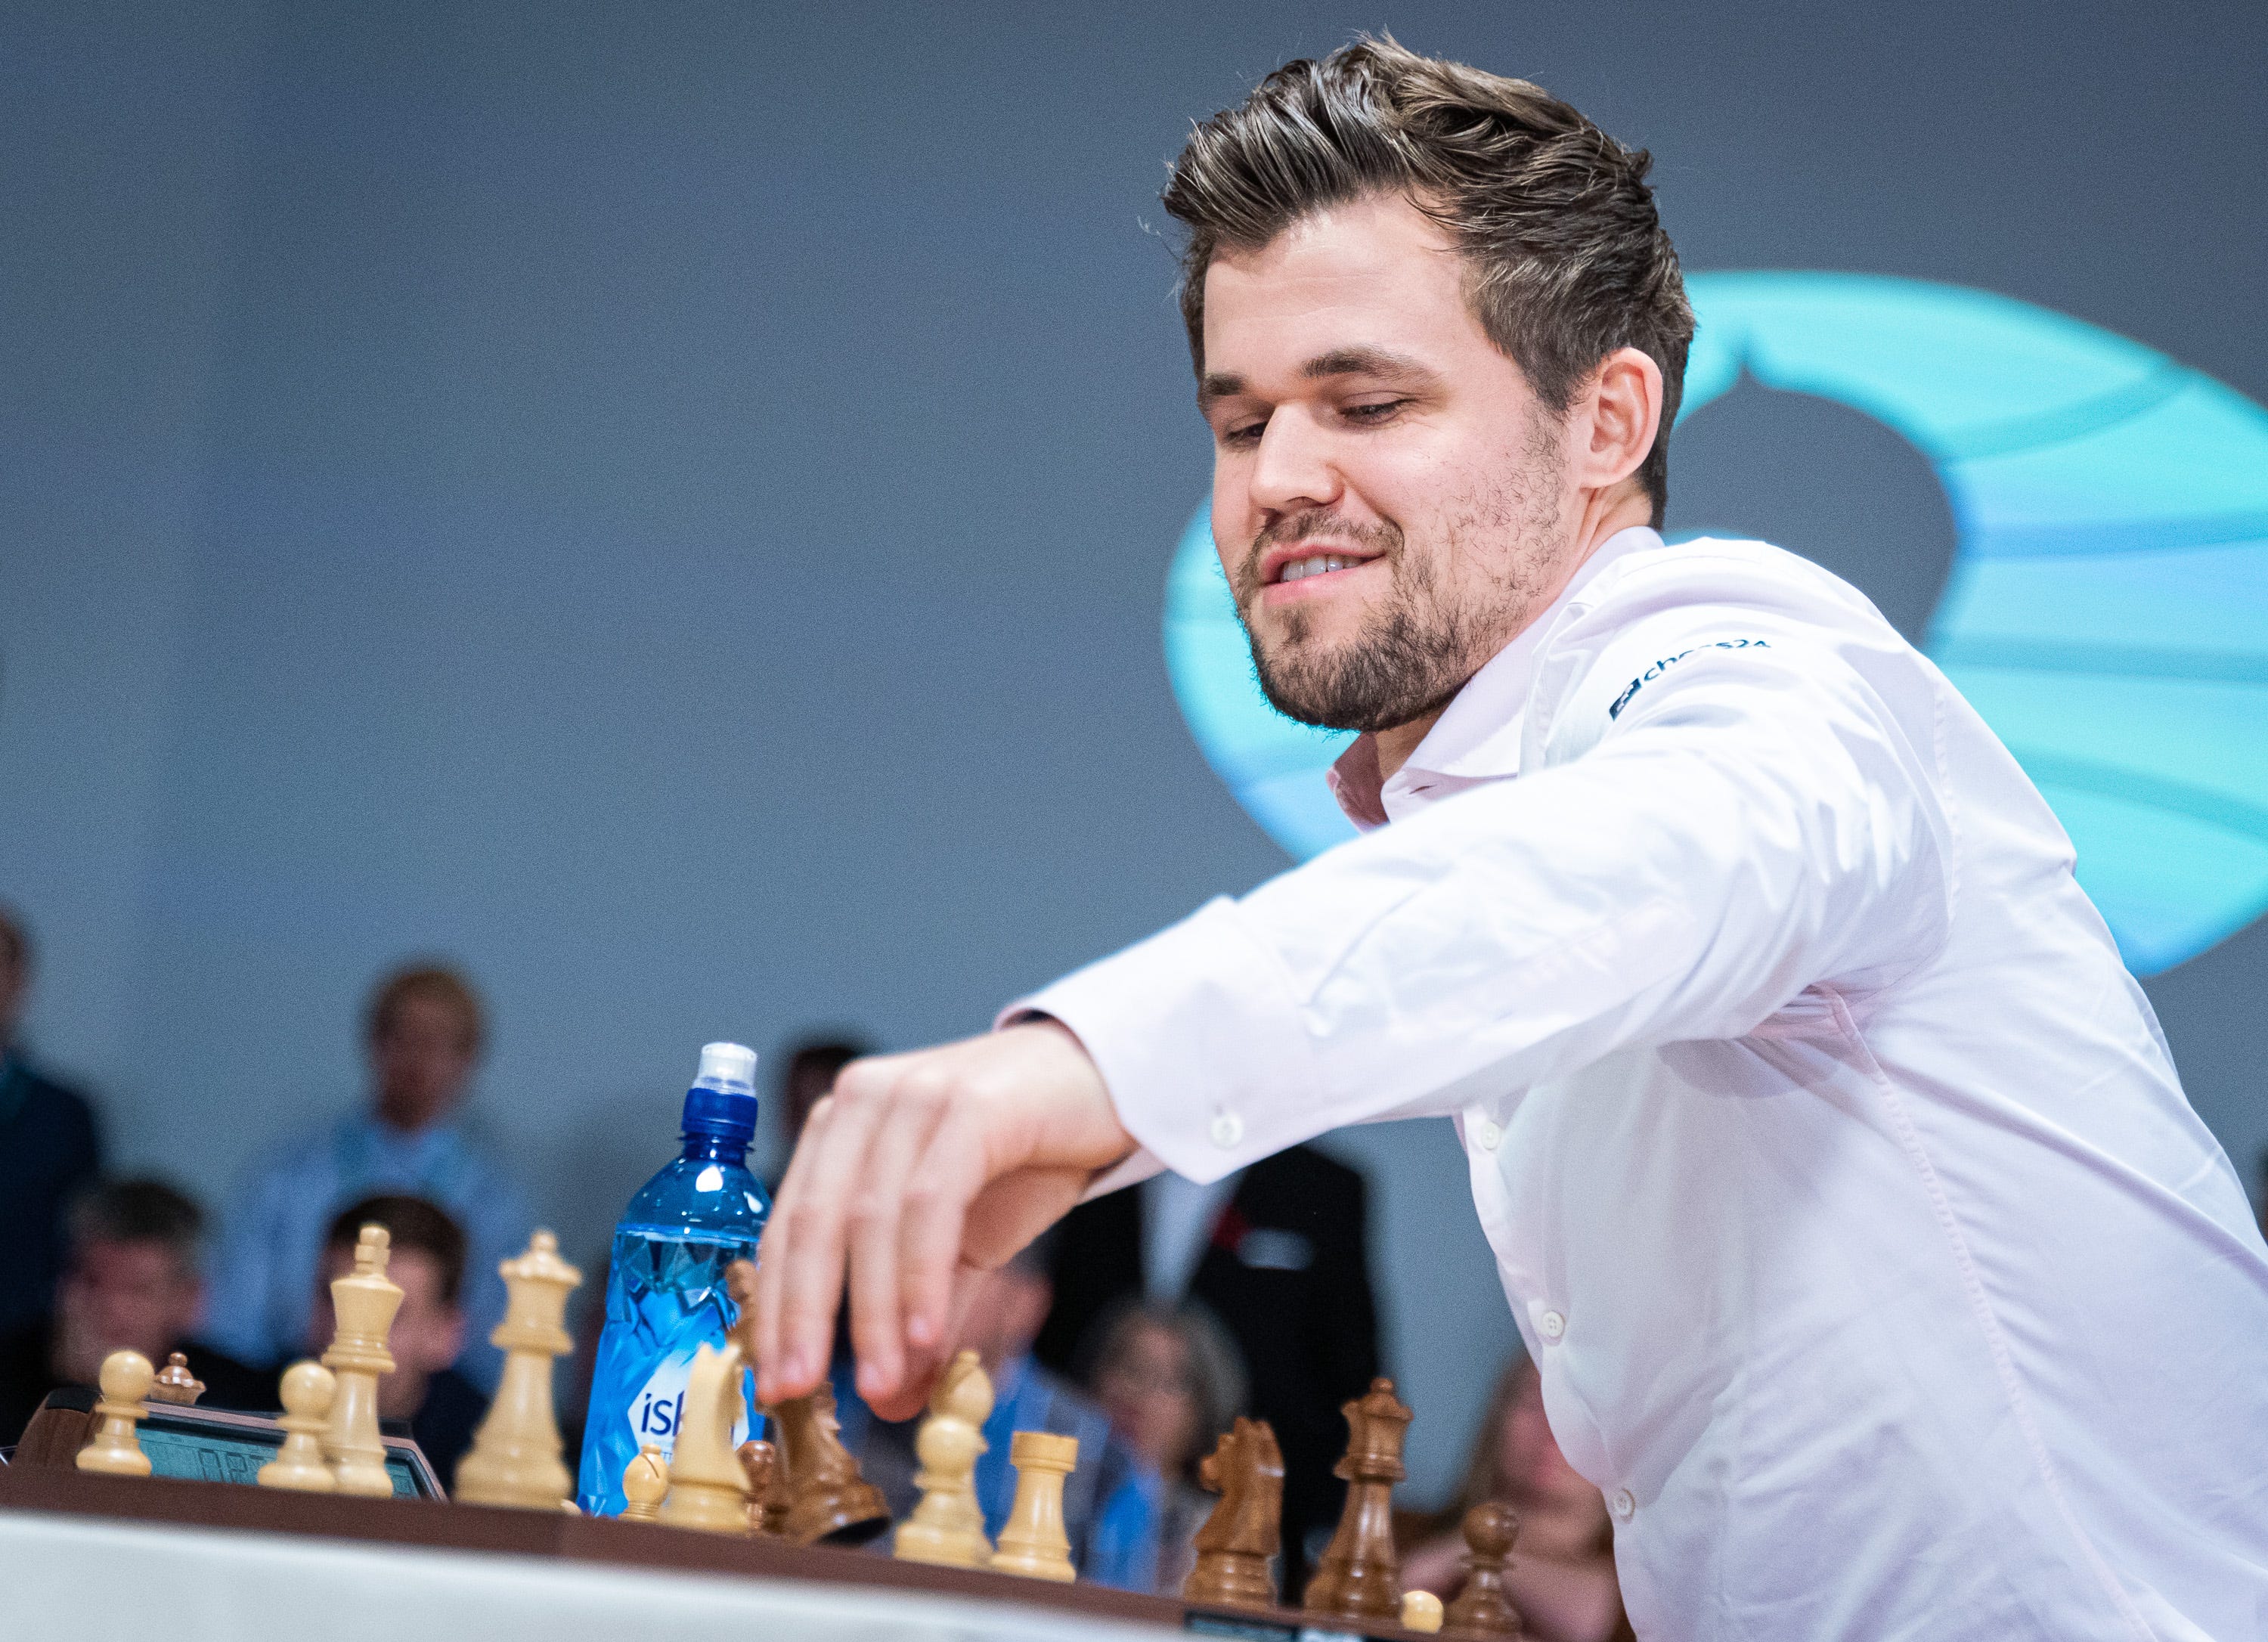 Magnus Carlsen's most outrageous bullet Chess game in Chess History 